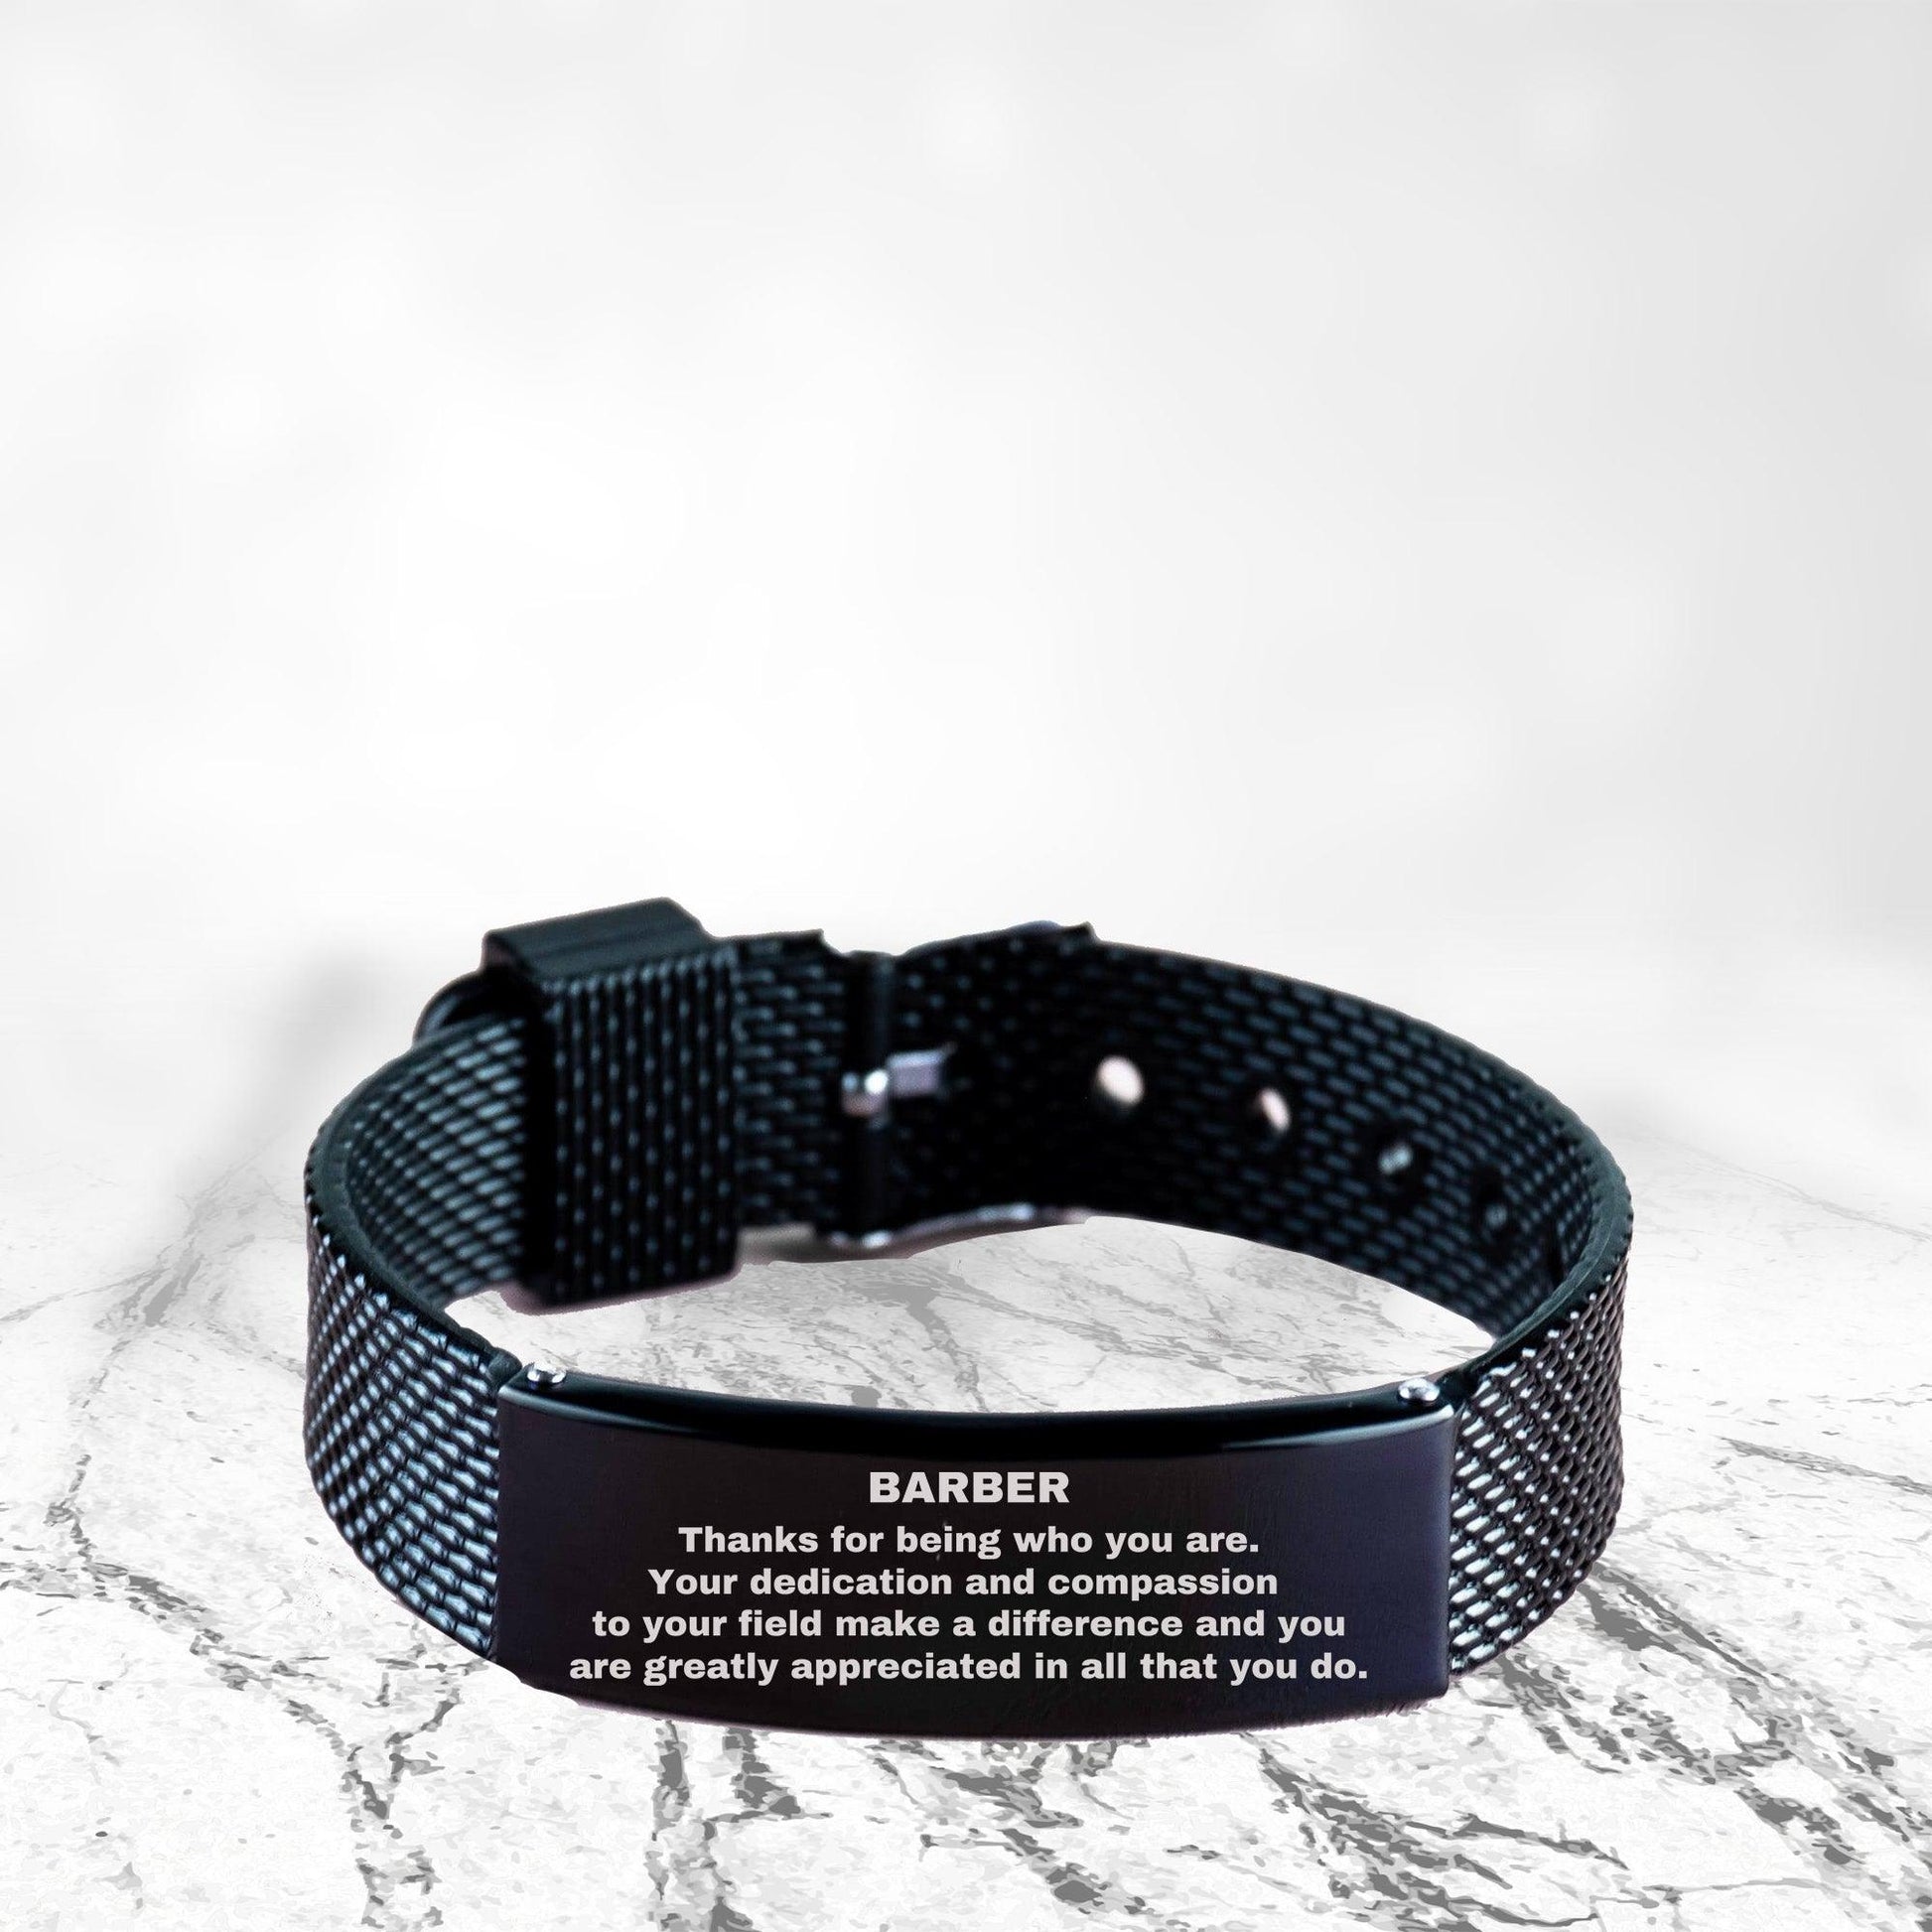 Barber Black Shark Mesh Stainless Steel Engraved Bracelet - Thanks for being who you are - Birthday Christmas Jewelry Gifts Coworkers Colleague Boss - Mallard Moon Gift Shop